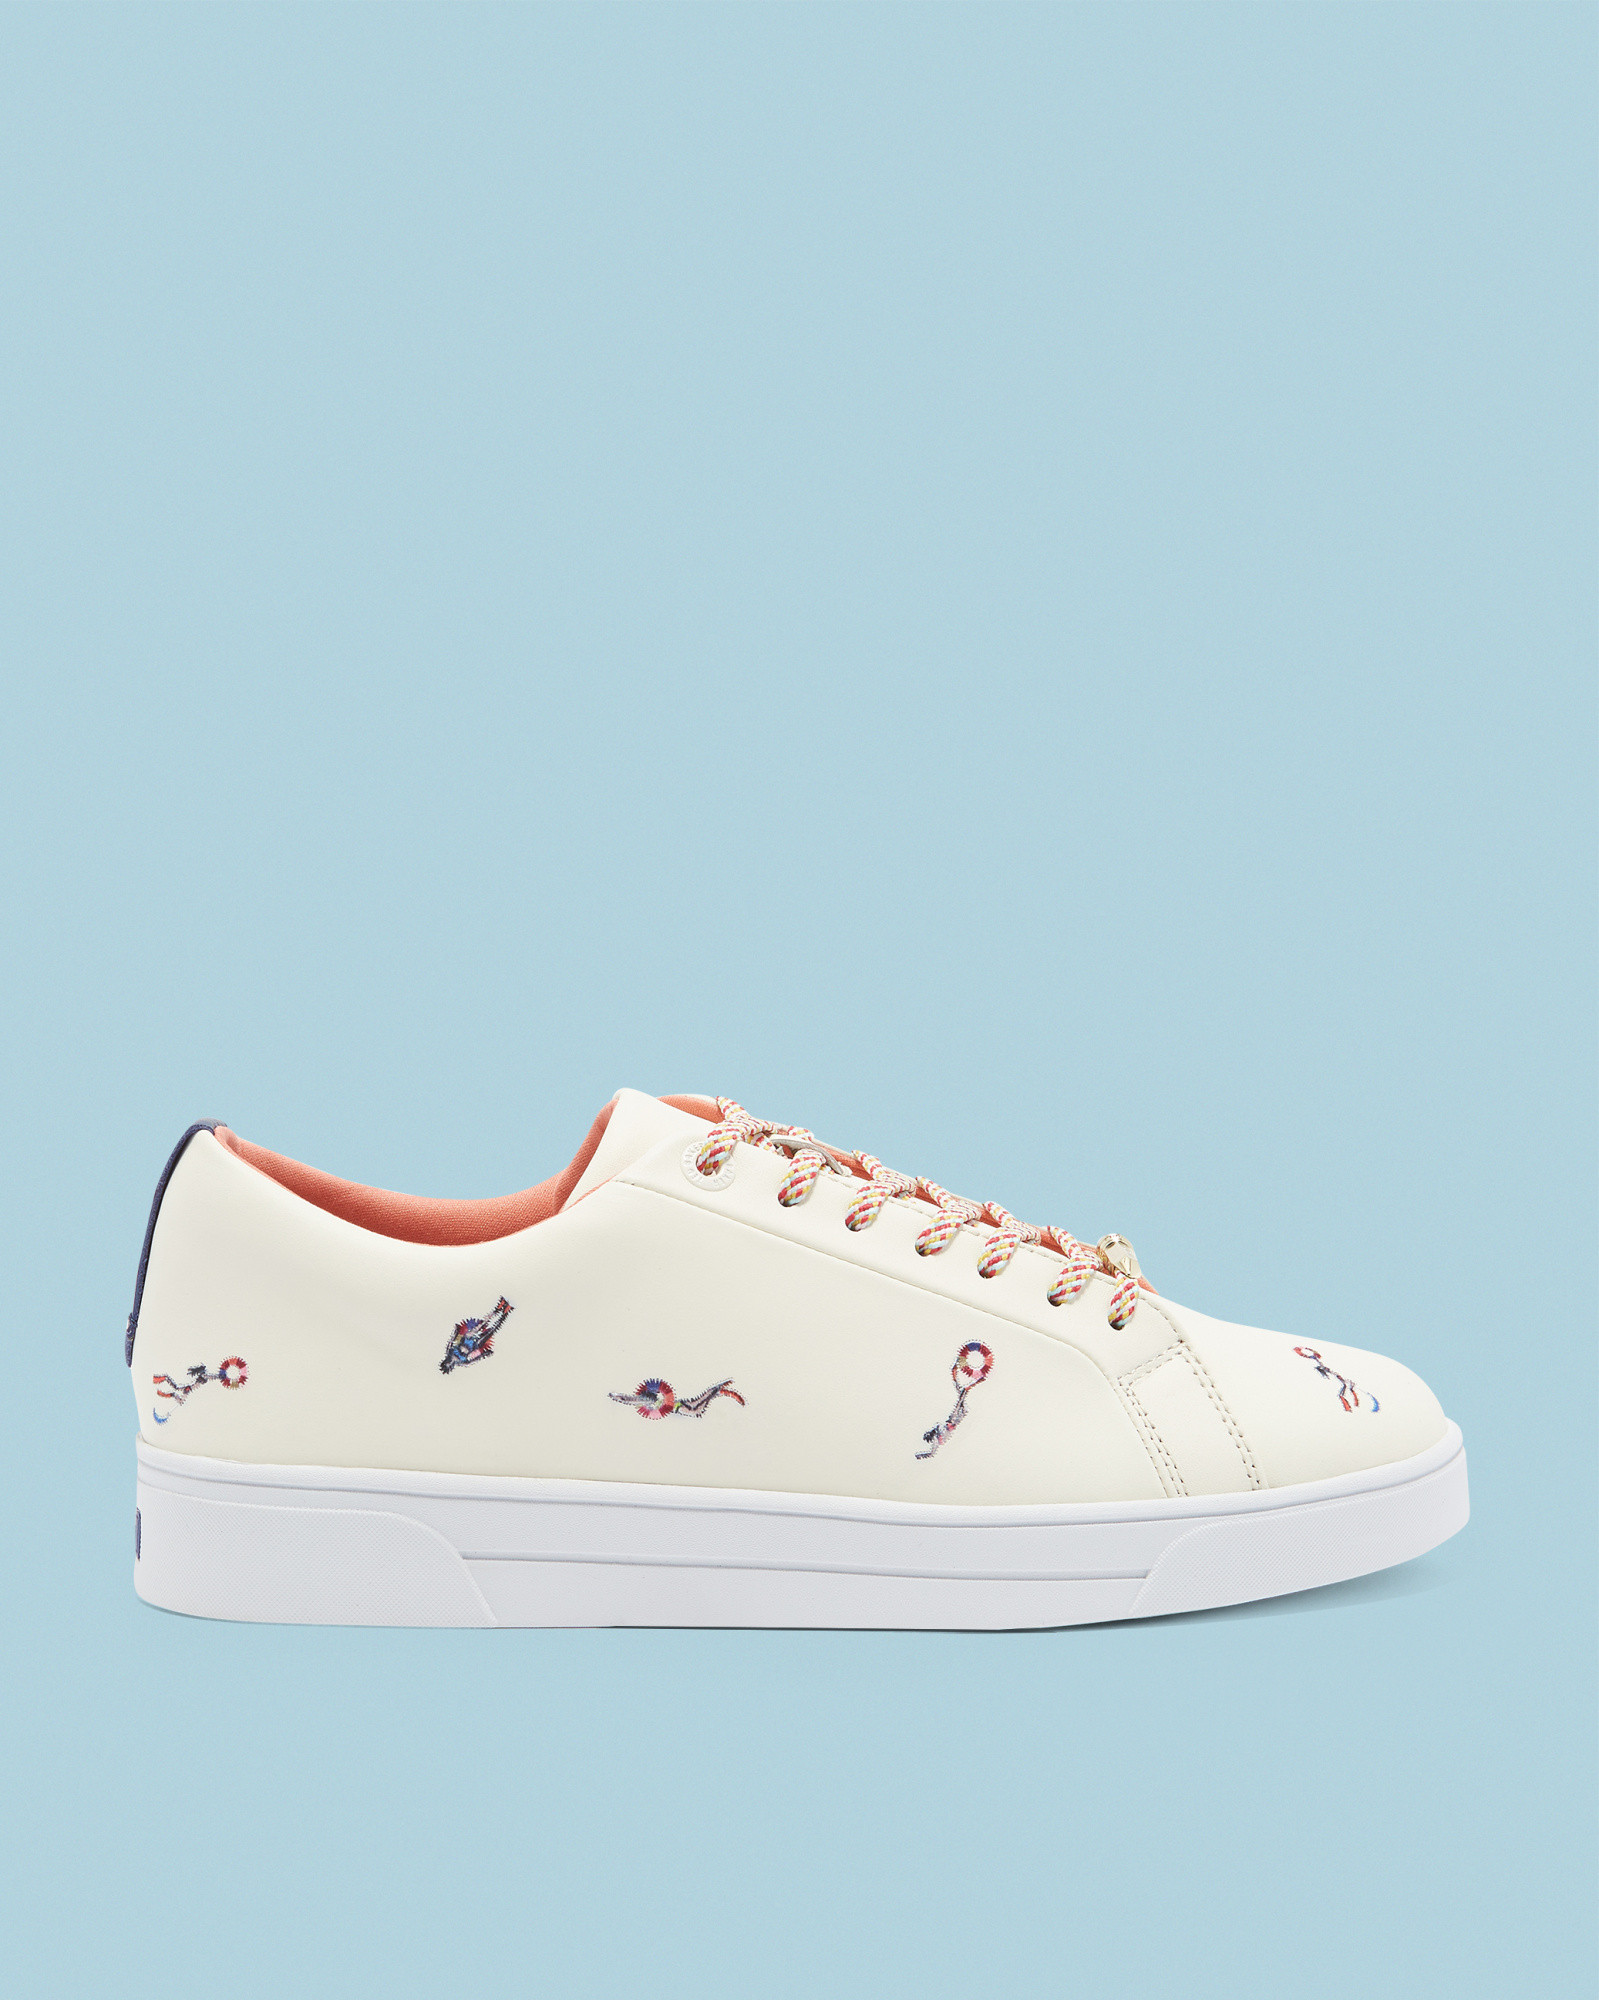 NOANA Swimmers embroidered trainers